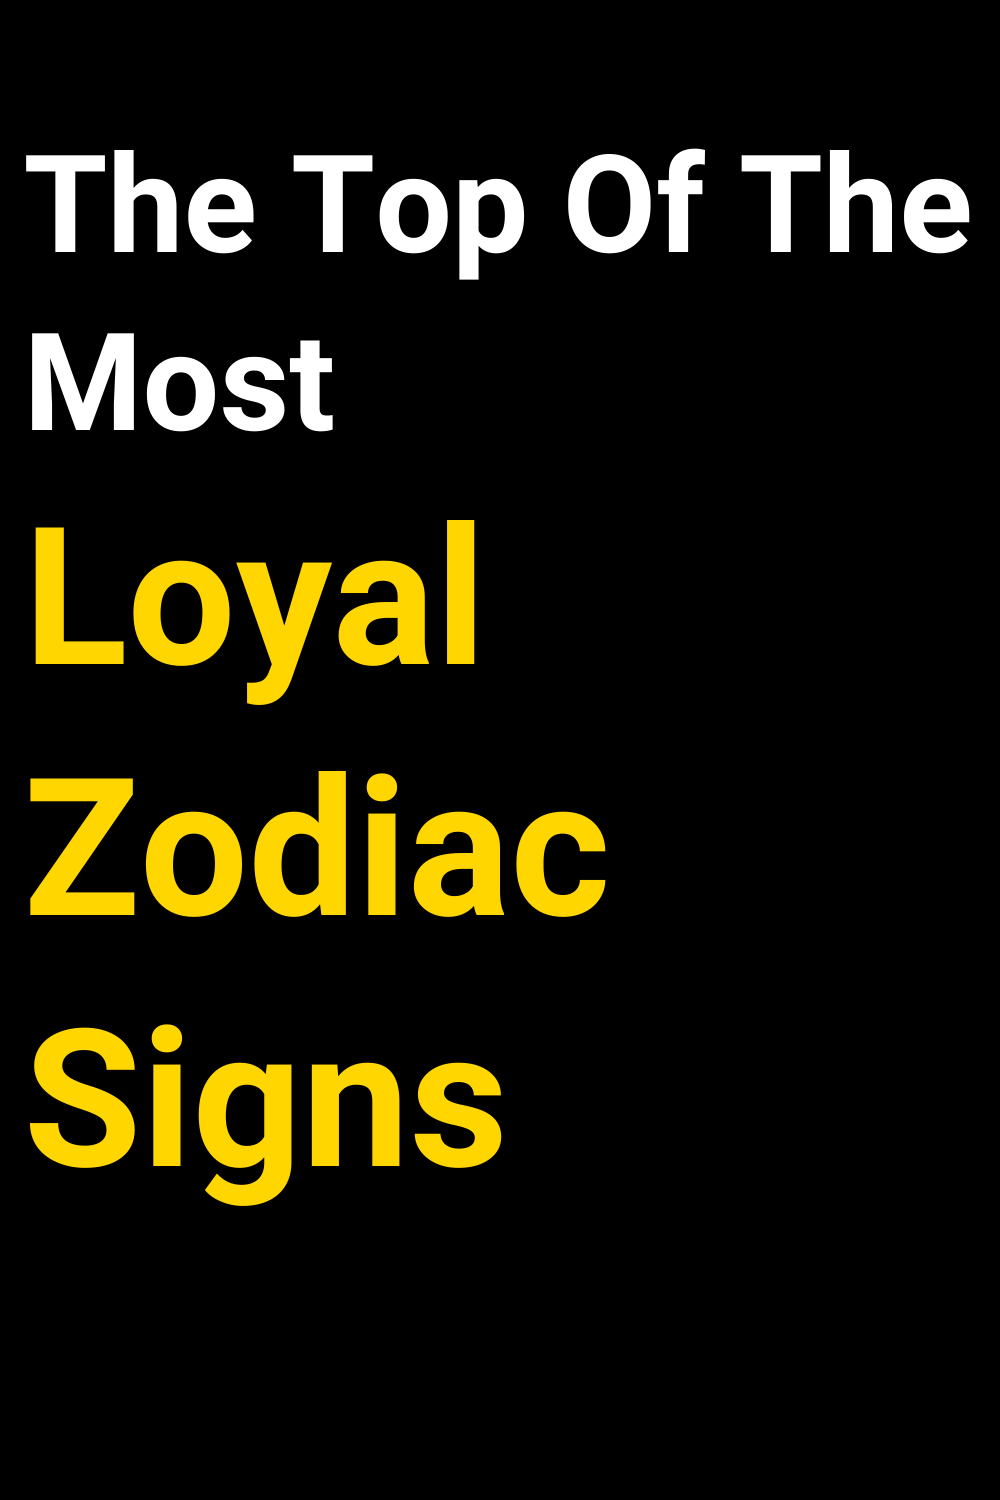 The Top Of The Most Loyal Zodiac Signs